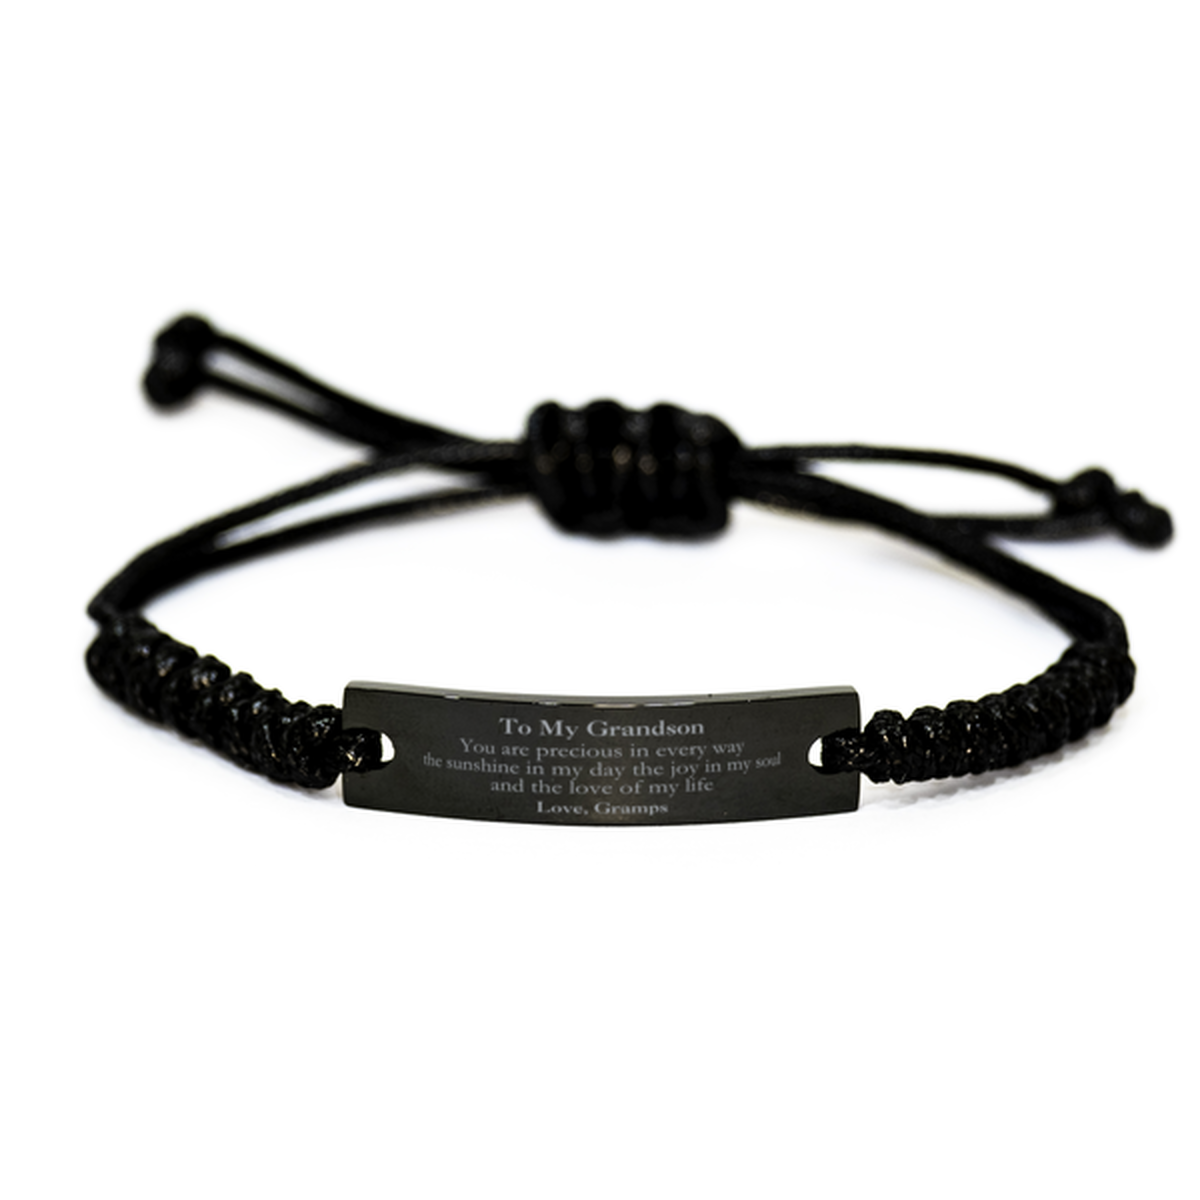 Graduation Gifts for Grandson Black Rope Bracelet Present from Gramps, Christmas Grandson Birthday Gifts Grandson You are precious in every way the sunshine in my day. Love, Gramps